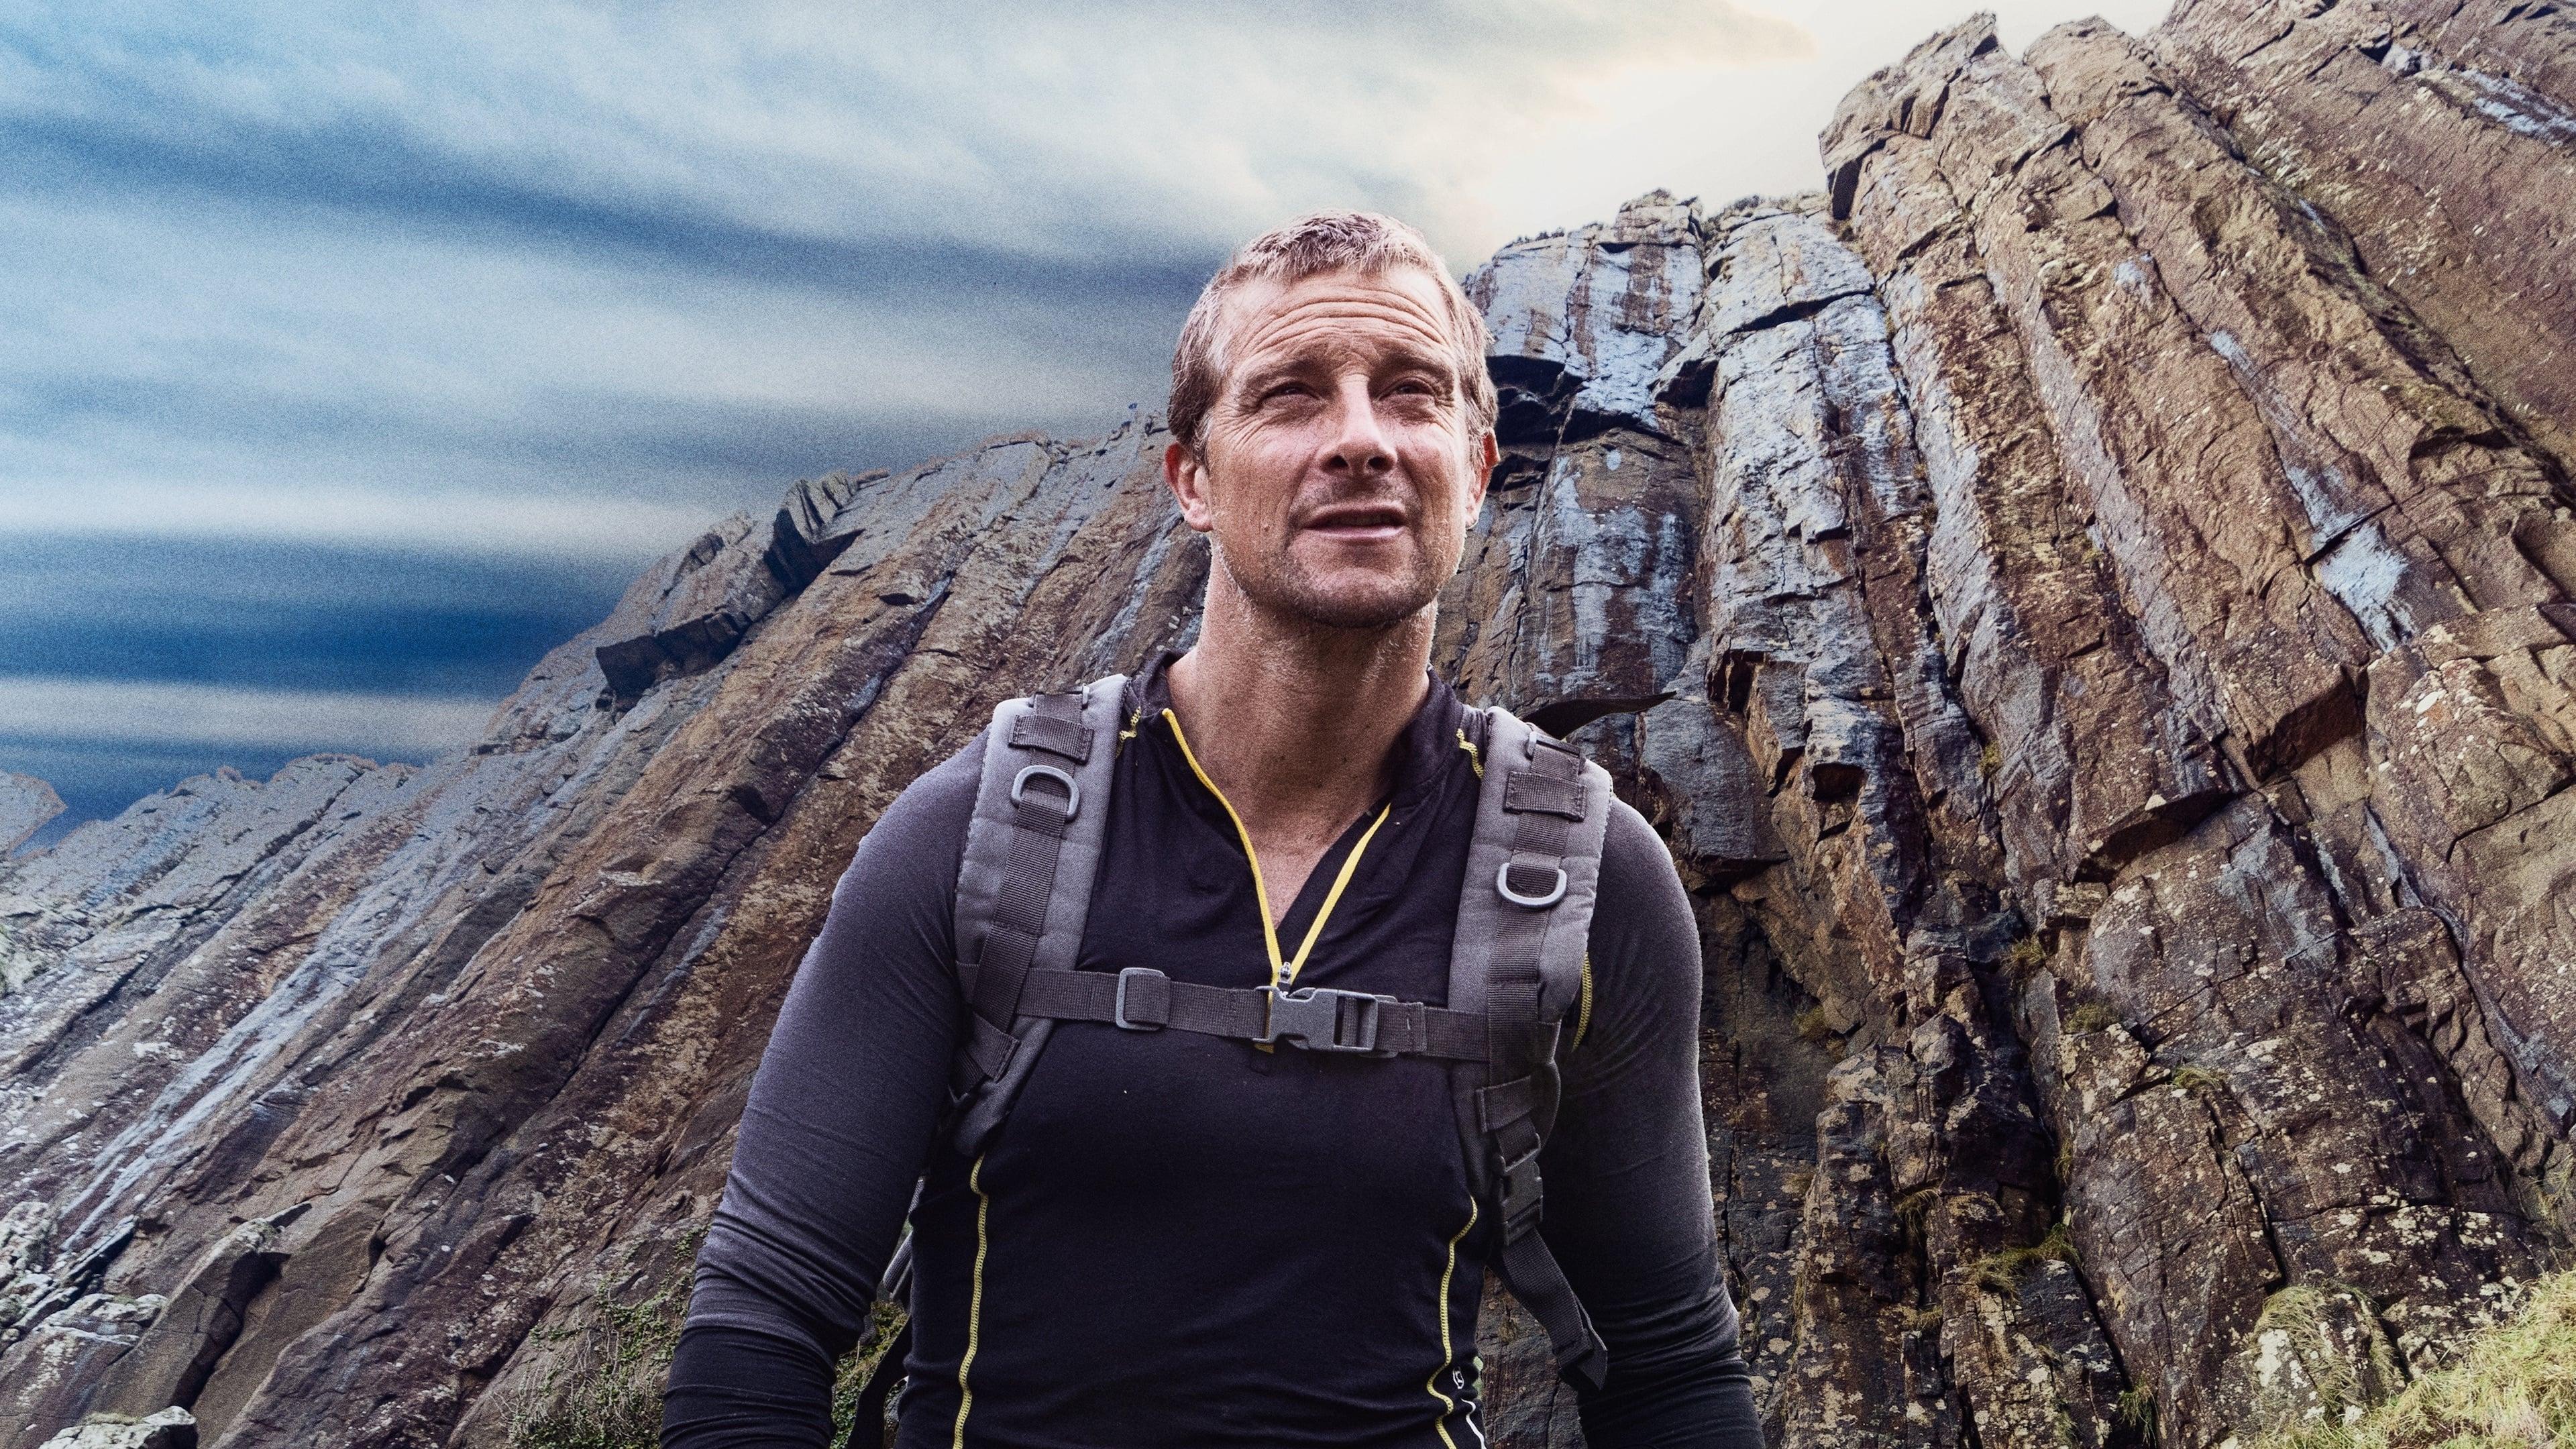 Running Wild with Bear Grylls: The Challenge backdrop